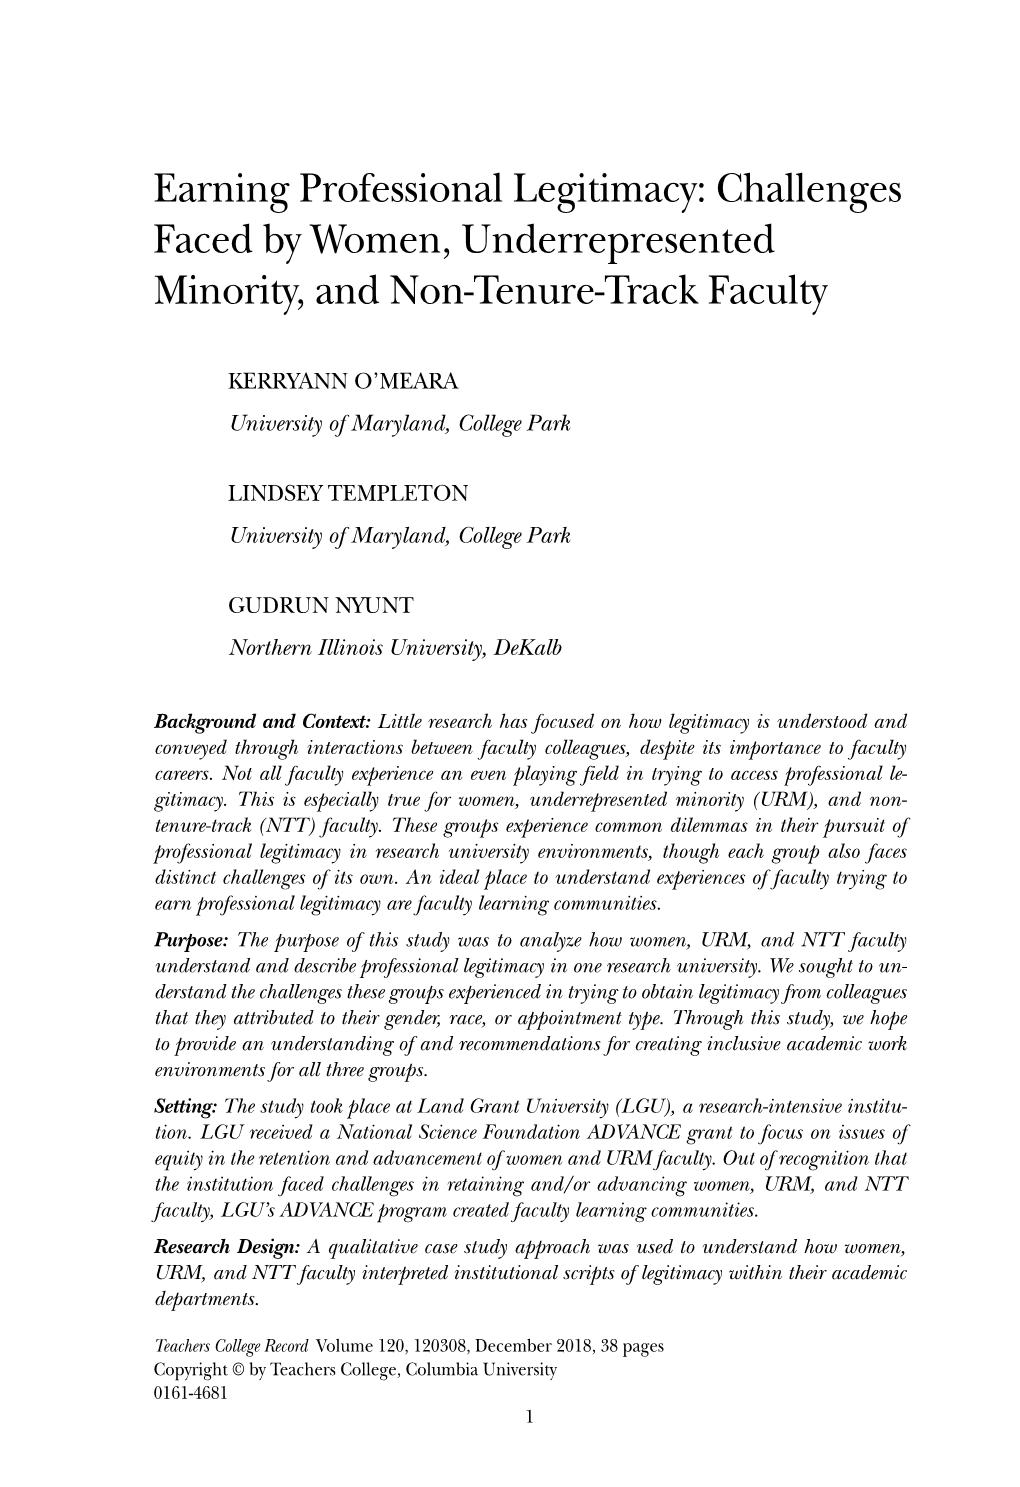 Earning Professional Legitimacy: Challenges Faced by Women, Underrepresented Minority, and Non-Tenure-Track Faculty